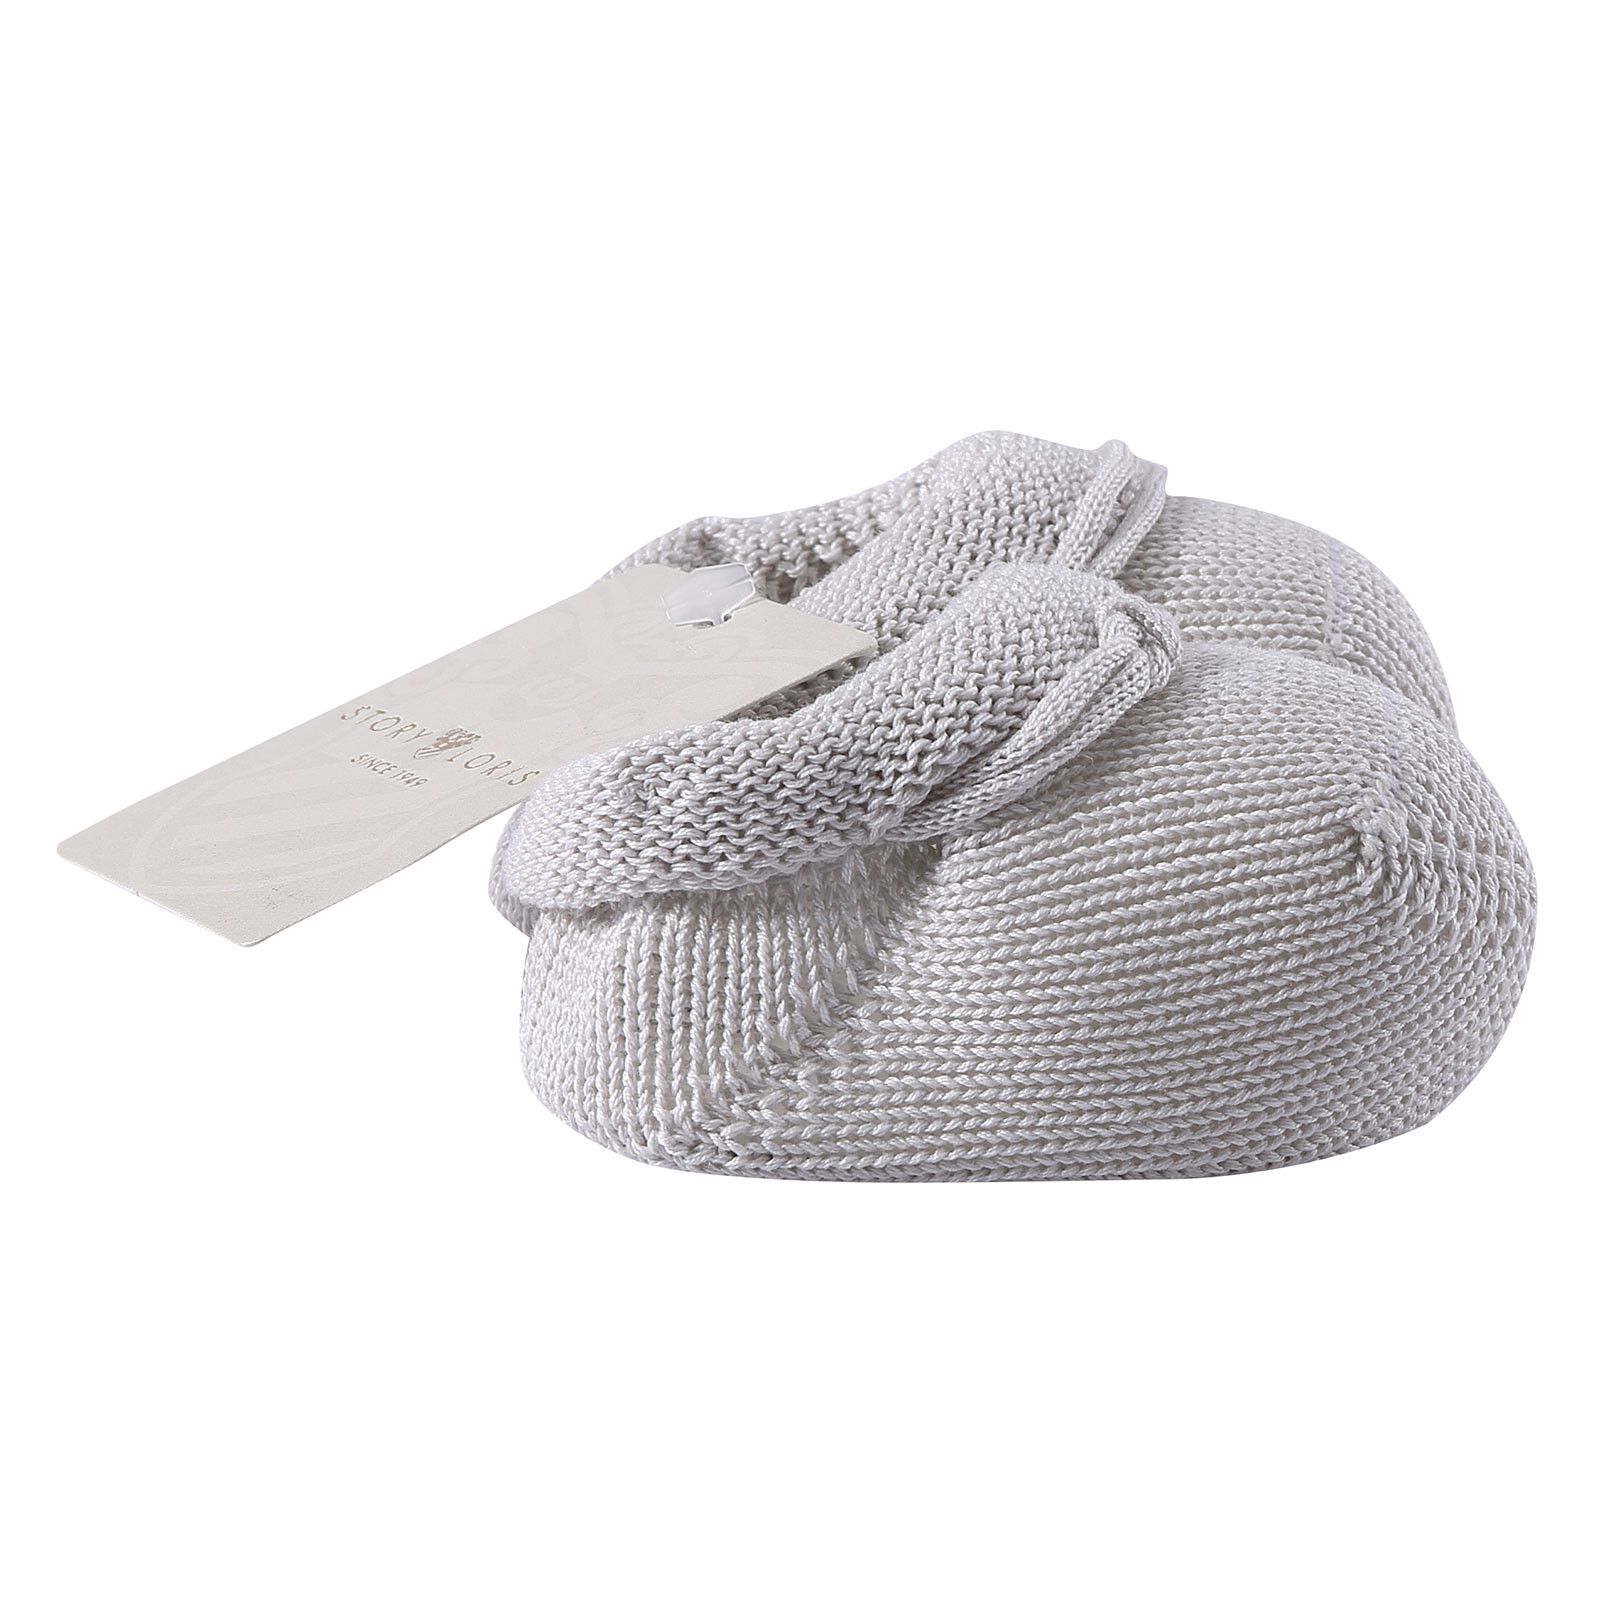 Baby Grey Knitted Cotton Shoes - CÉMAROSE | Children's Fashion Store - 3